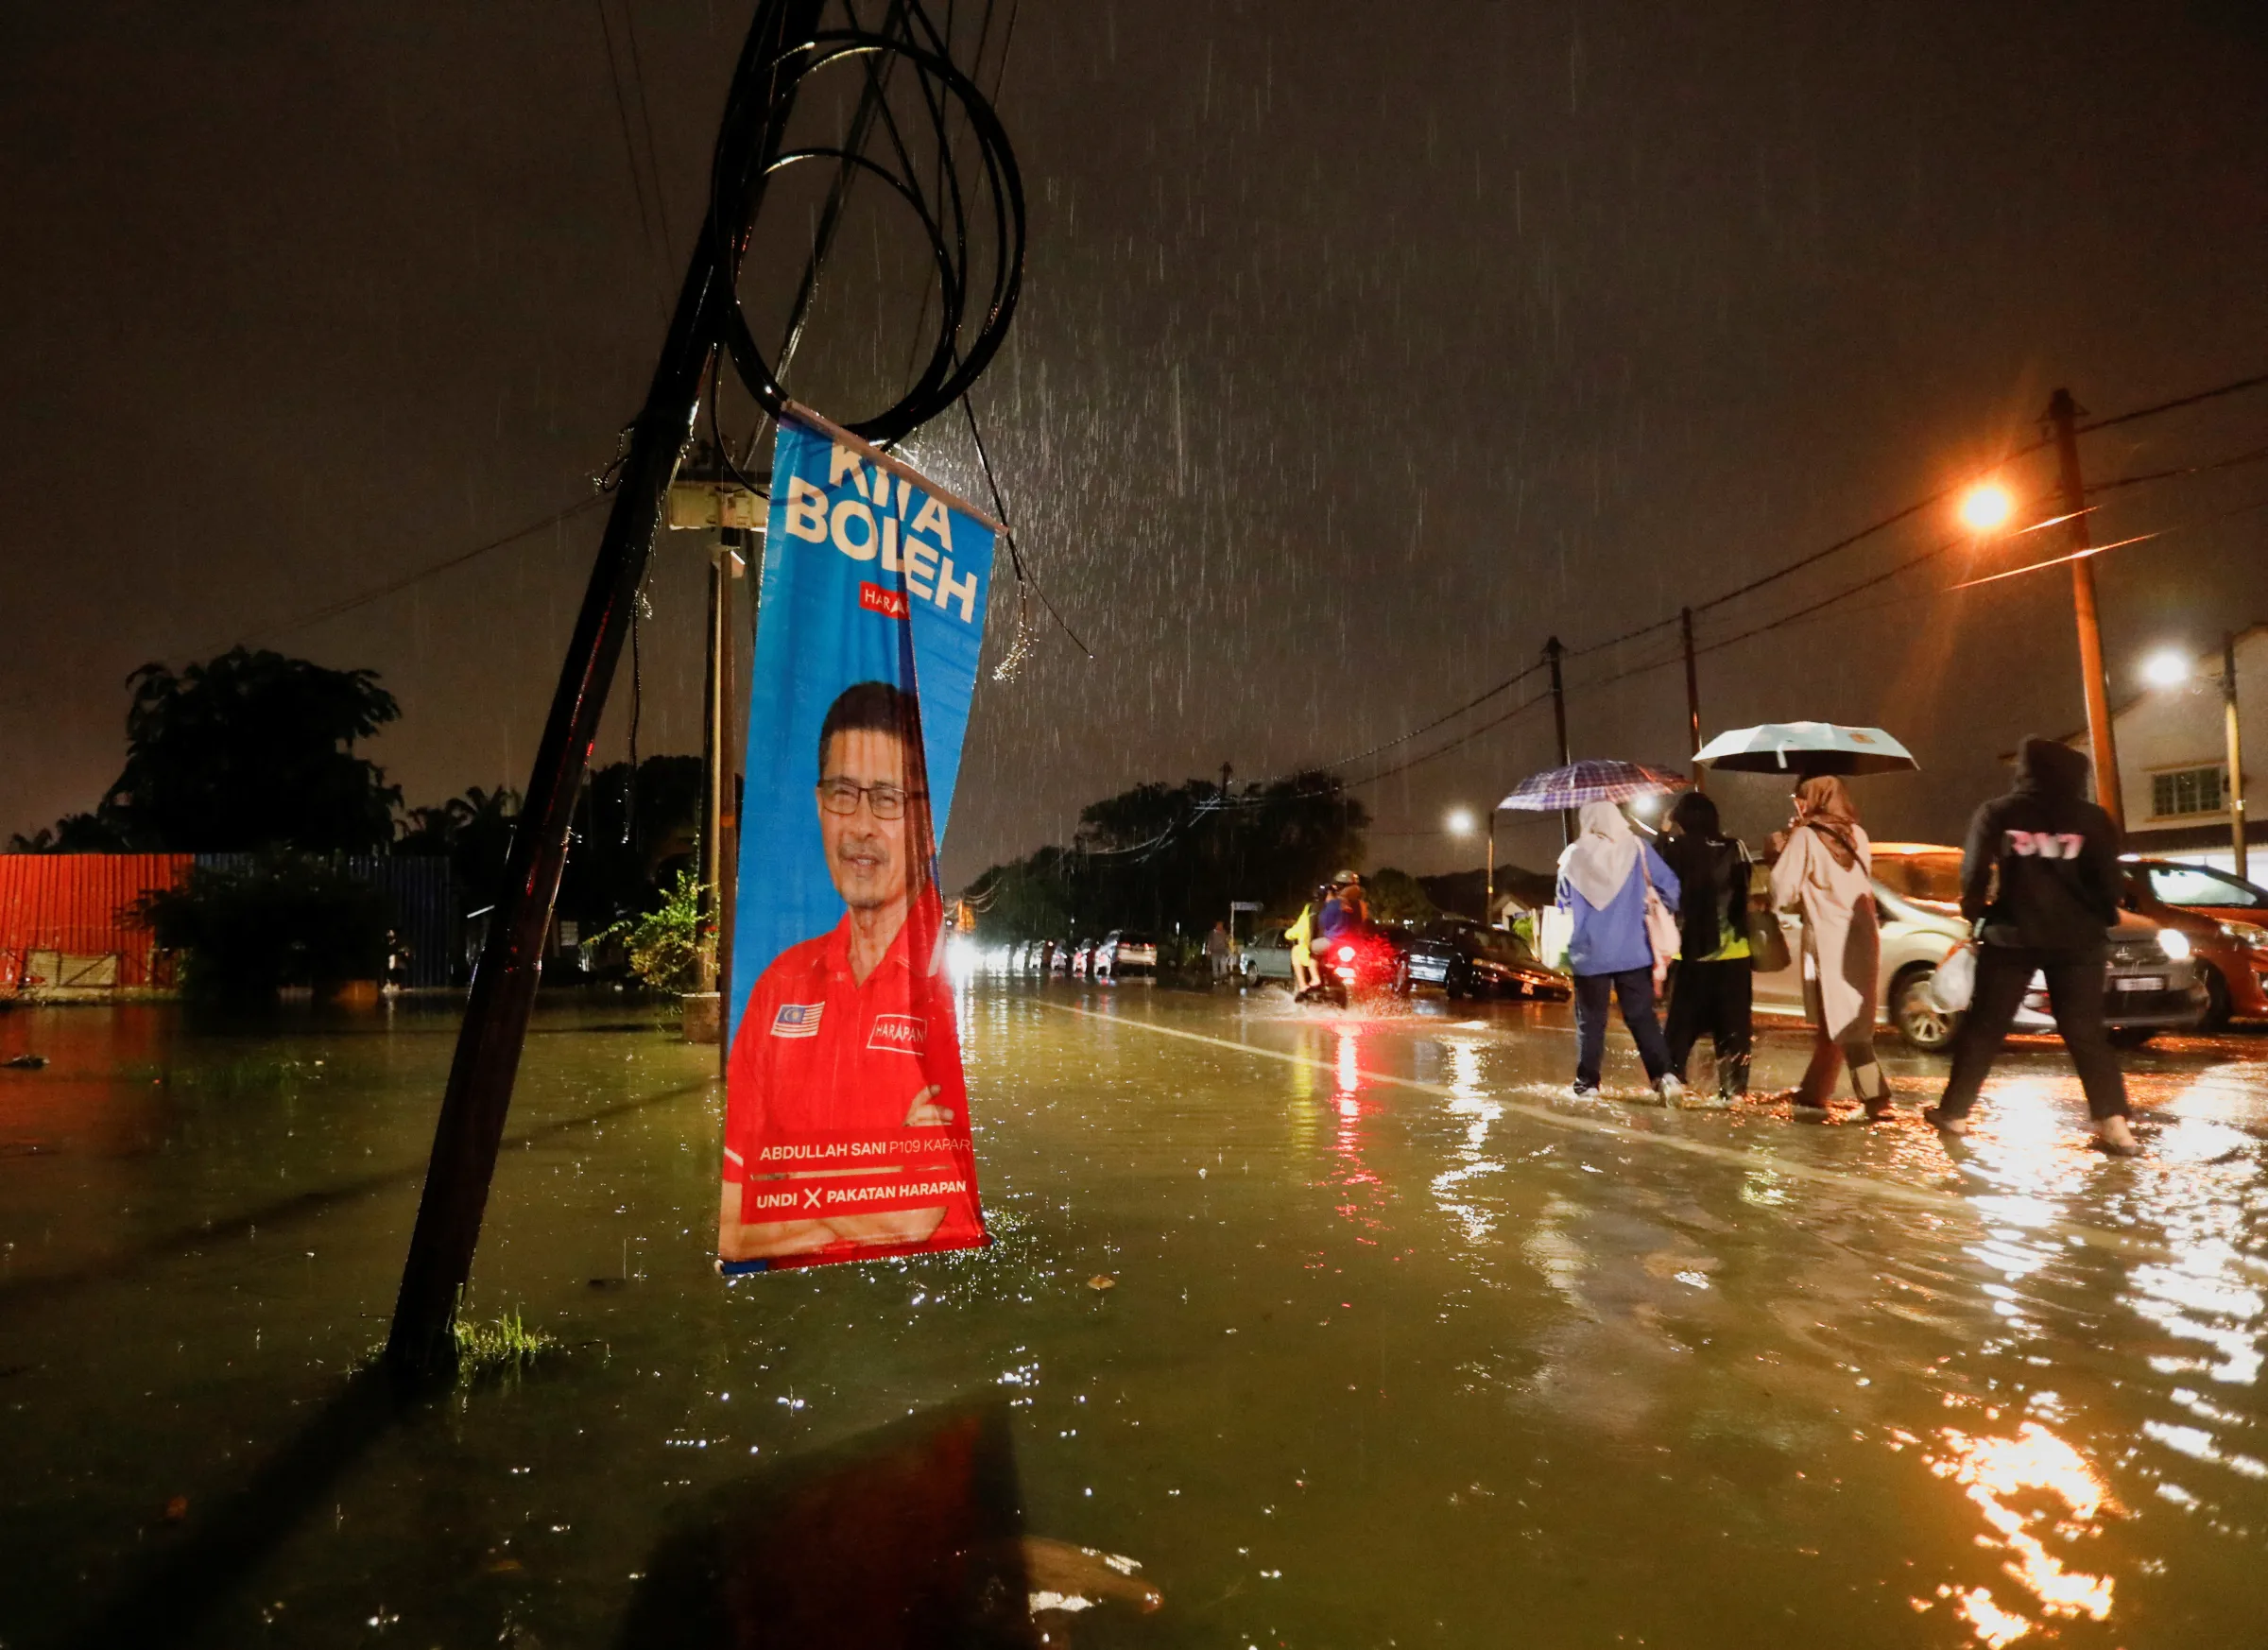 An election banner is surrounded by the flood water during a flash flood at Klang, Selangor, Malaysia November 10, 2022. REUTERS/Hasnoor Hussain